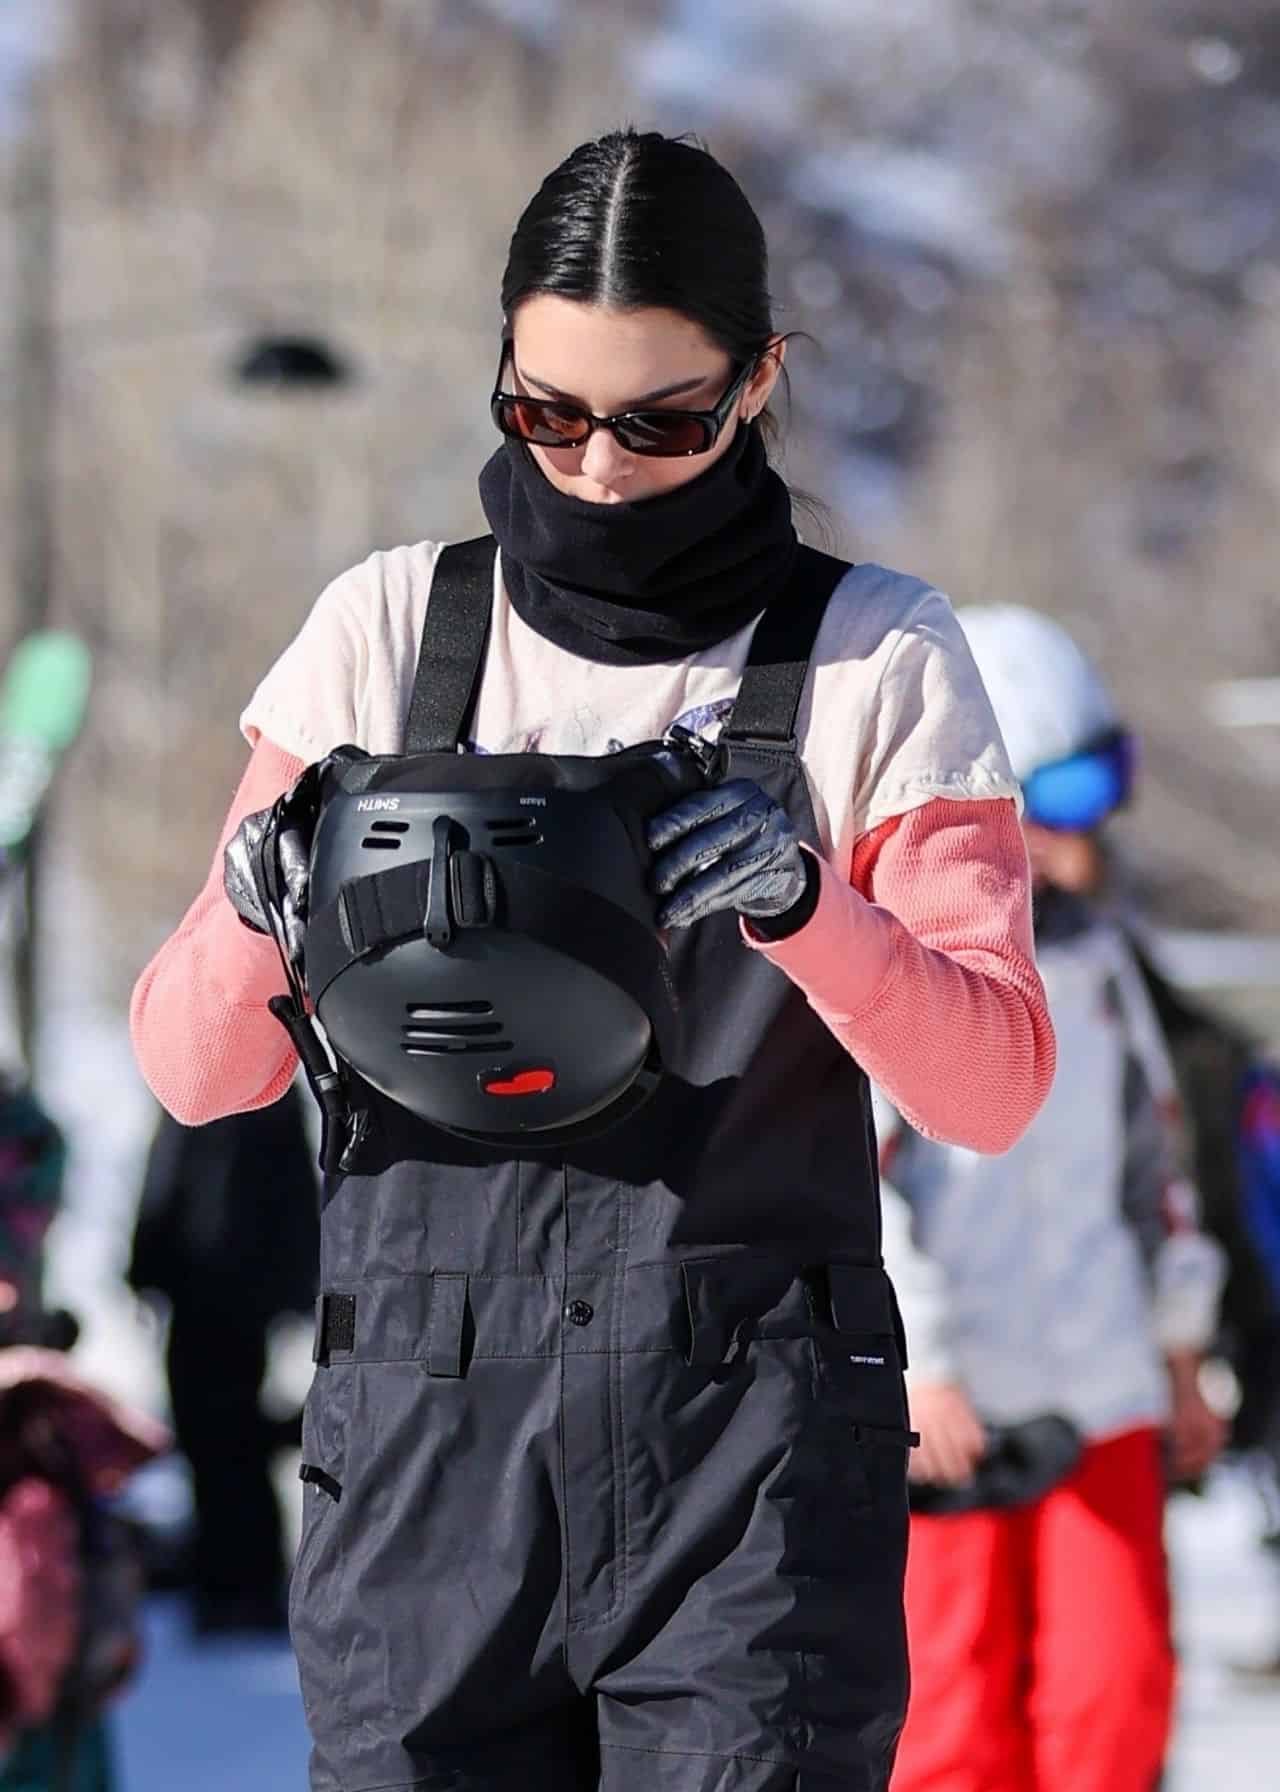 Kendall Jenner Sported an All-black Outfit as She Snowboarded in Aspen